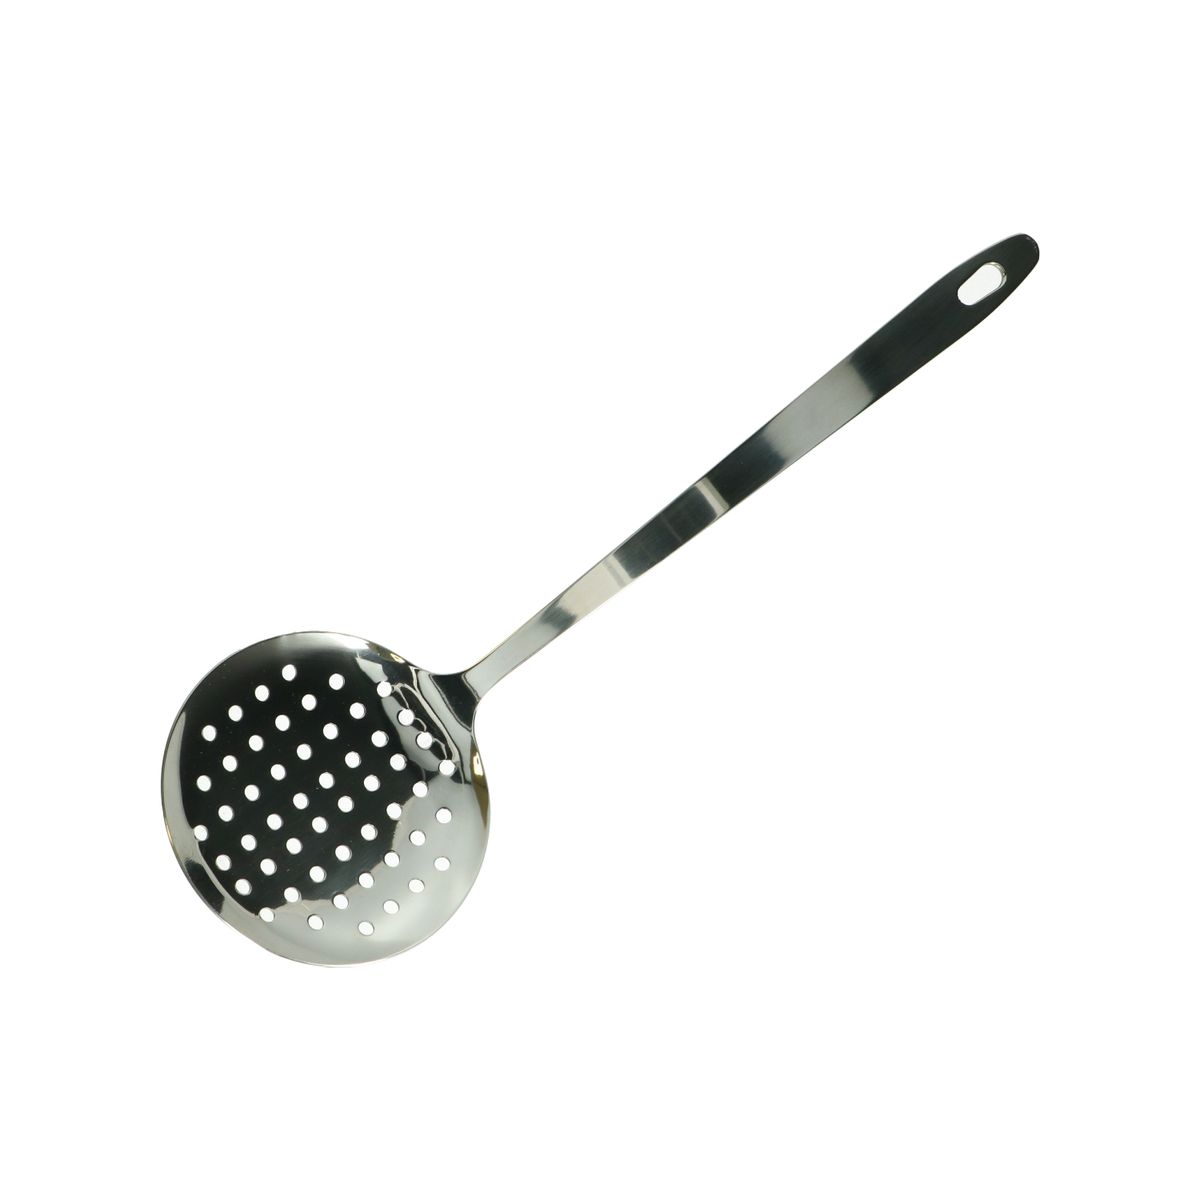 Slotted Spoon Skimmer Stainless Steel Ladle Spider Pasta Strainer